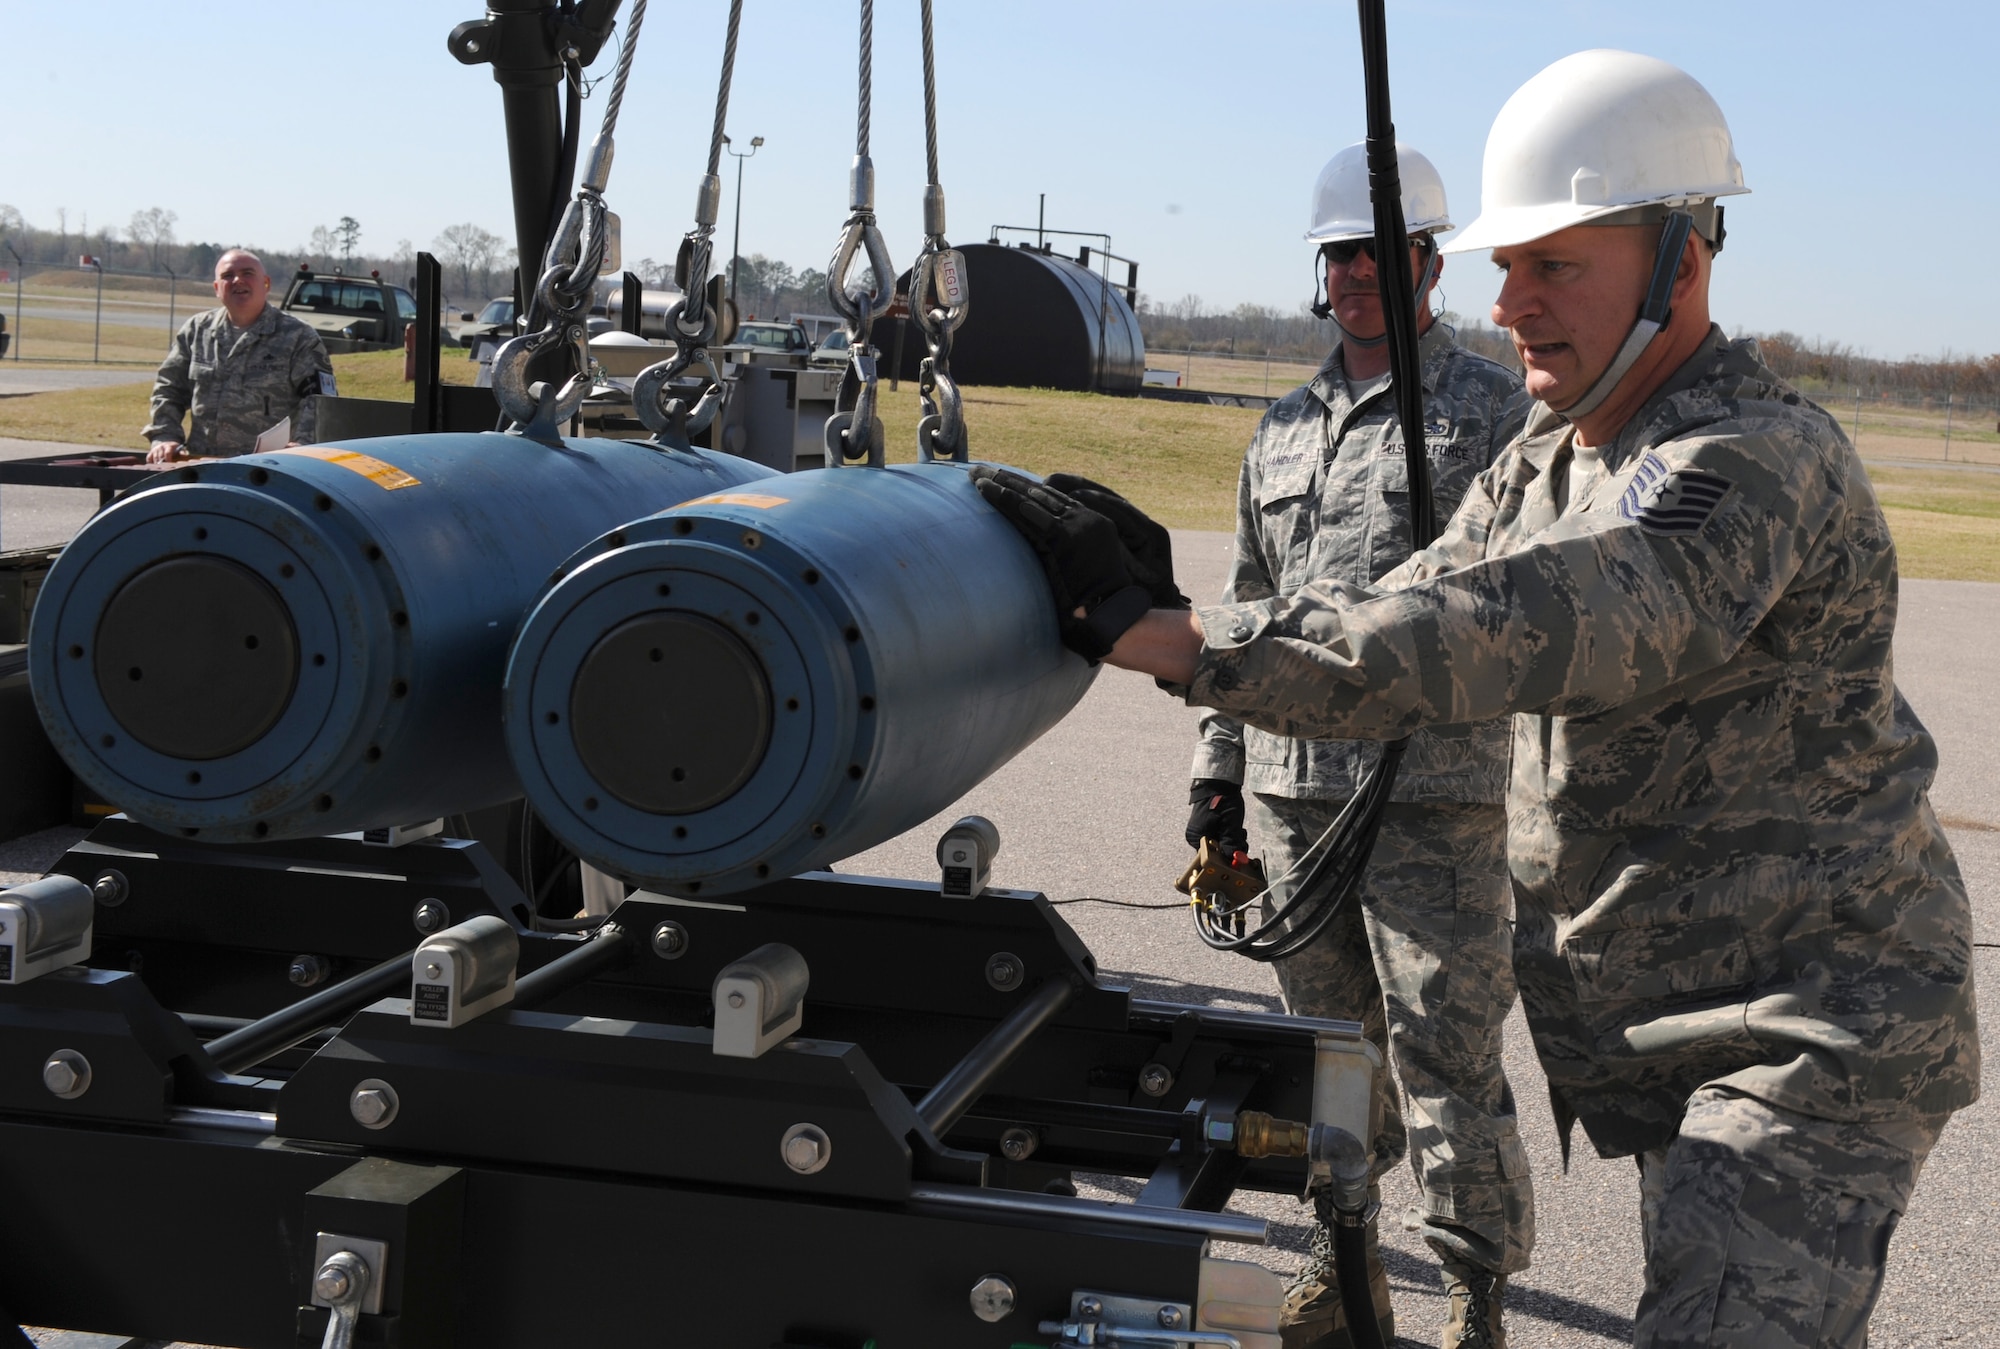 Tech. Sgts. Kevin Tolliver and Robert Chandler, both 4th Equipment Maintenance Squadron conventional maintenance technicians, load GBU-38 training bombs onto a rack on Seymour Johnson Air Force Base, N.C., March 24, 2010. The 4th EMS Airmen are building training bombs in preparation for the upcoming Phase I Operational Readiness Exercise. Tolliver hails from Beckley, W. Va. and Chandler is a native of Charlotte, N.C. (U.S. Air Force photo/Airman 1st Class Gino Reyes)